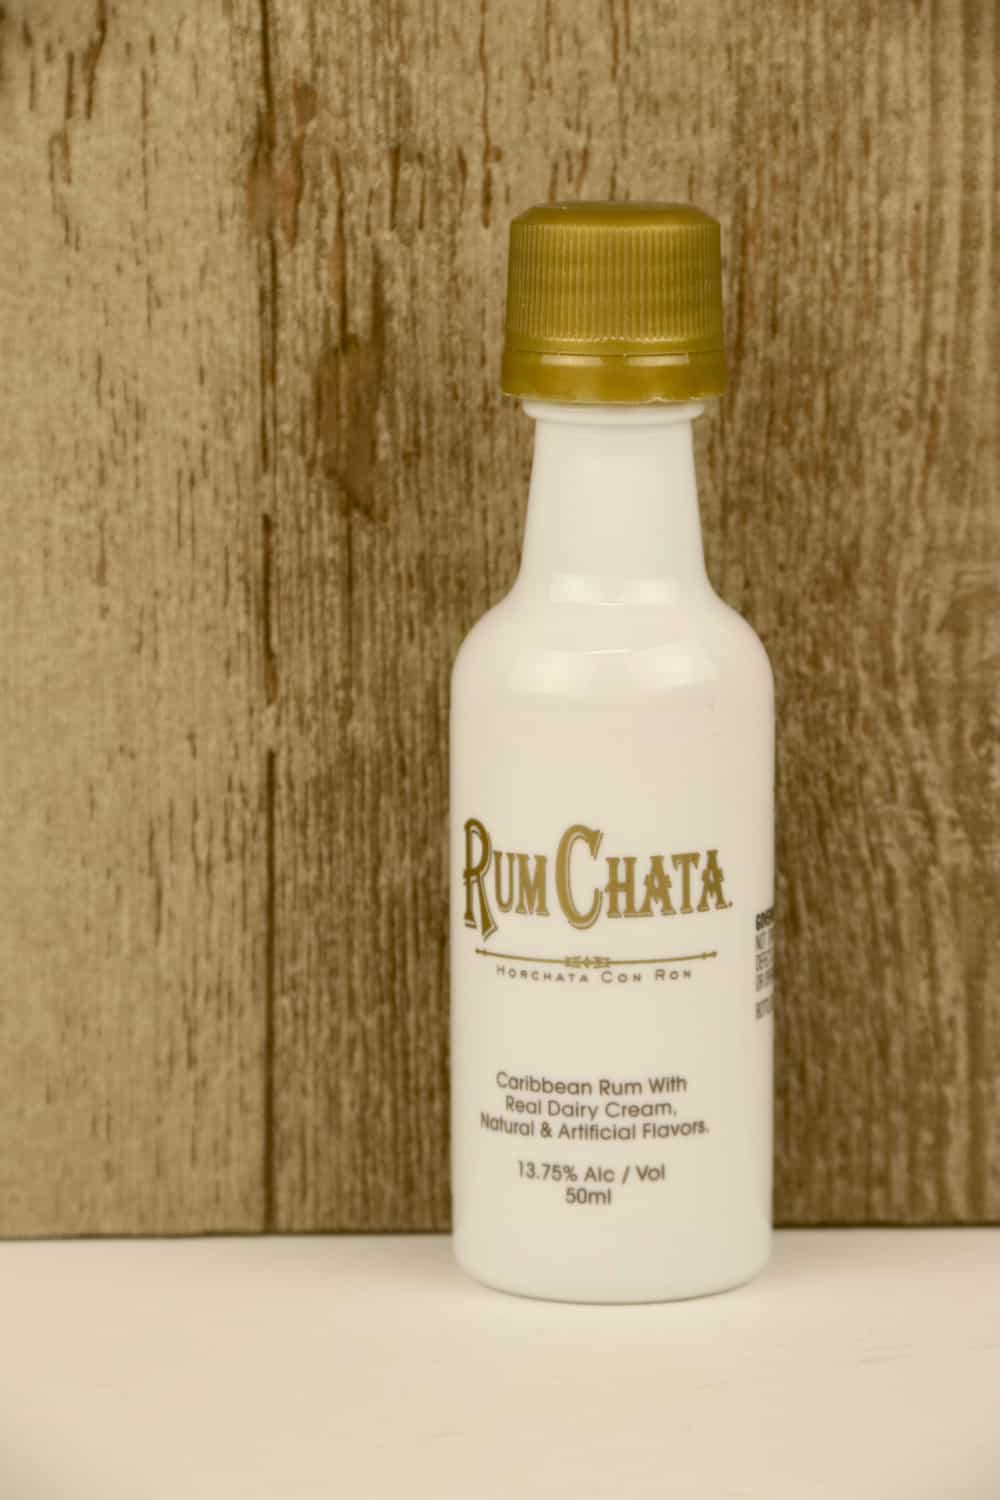 How Long Does RumChata Last? (Tips to Store for Long Time)